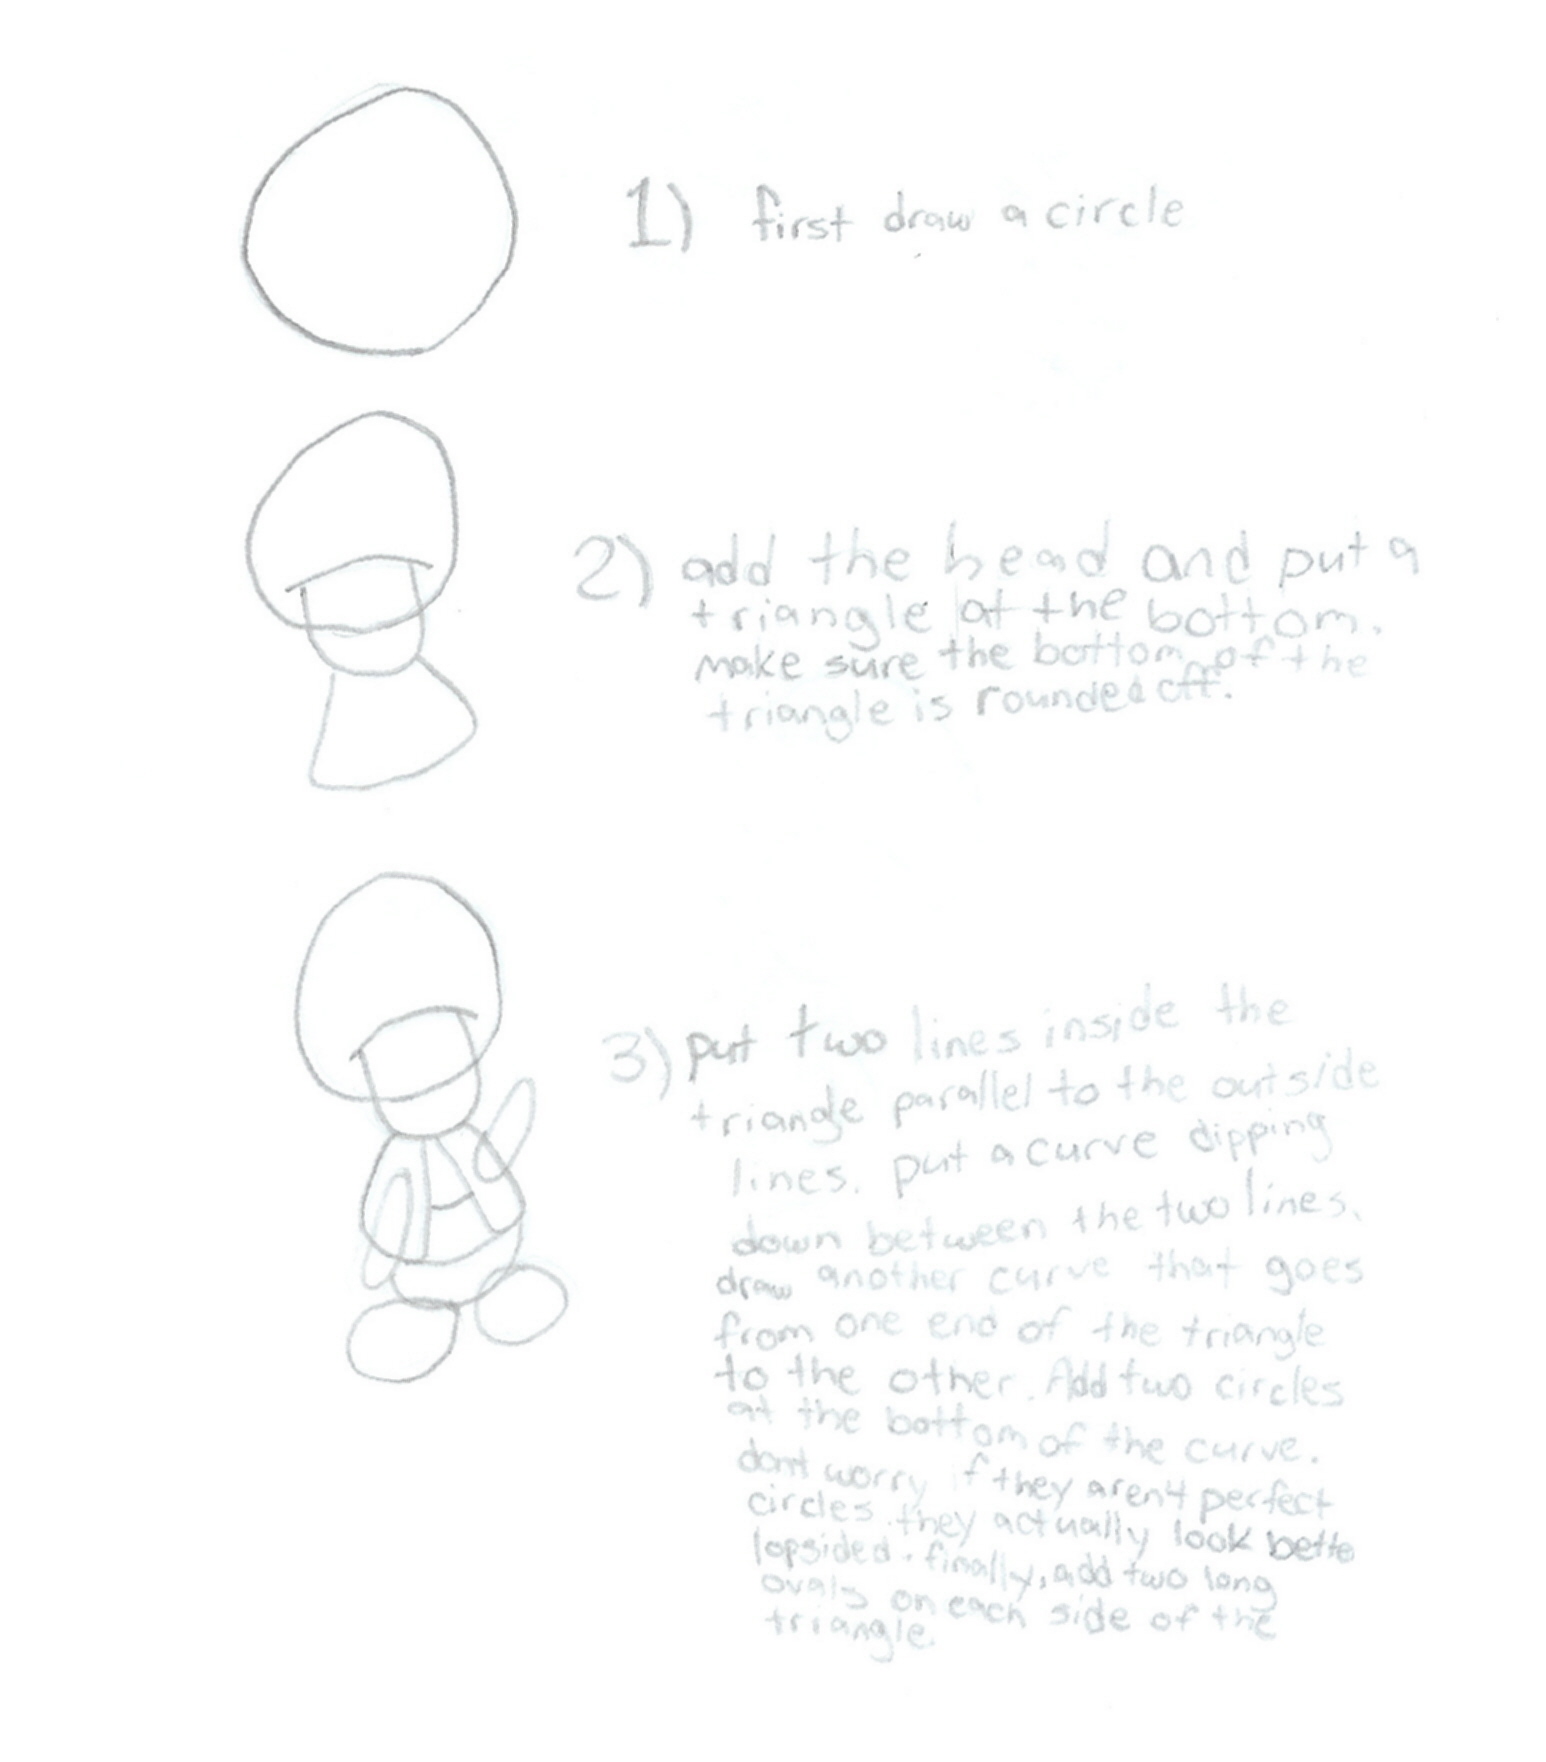 Toad tutorial Page 1 by pacmaster2000